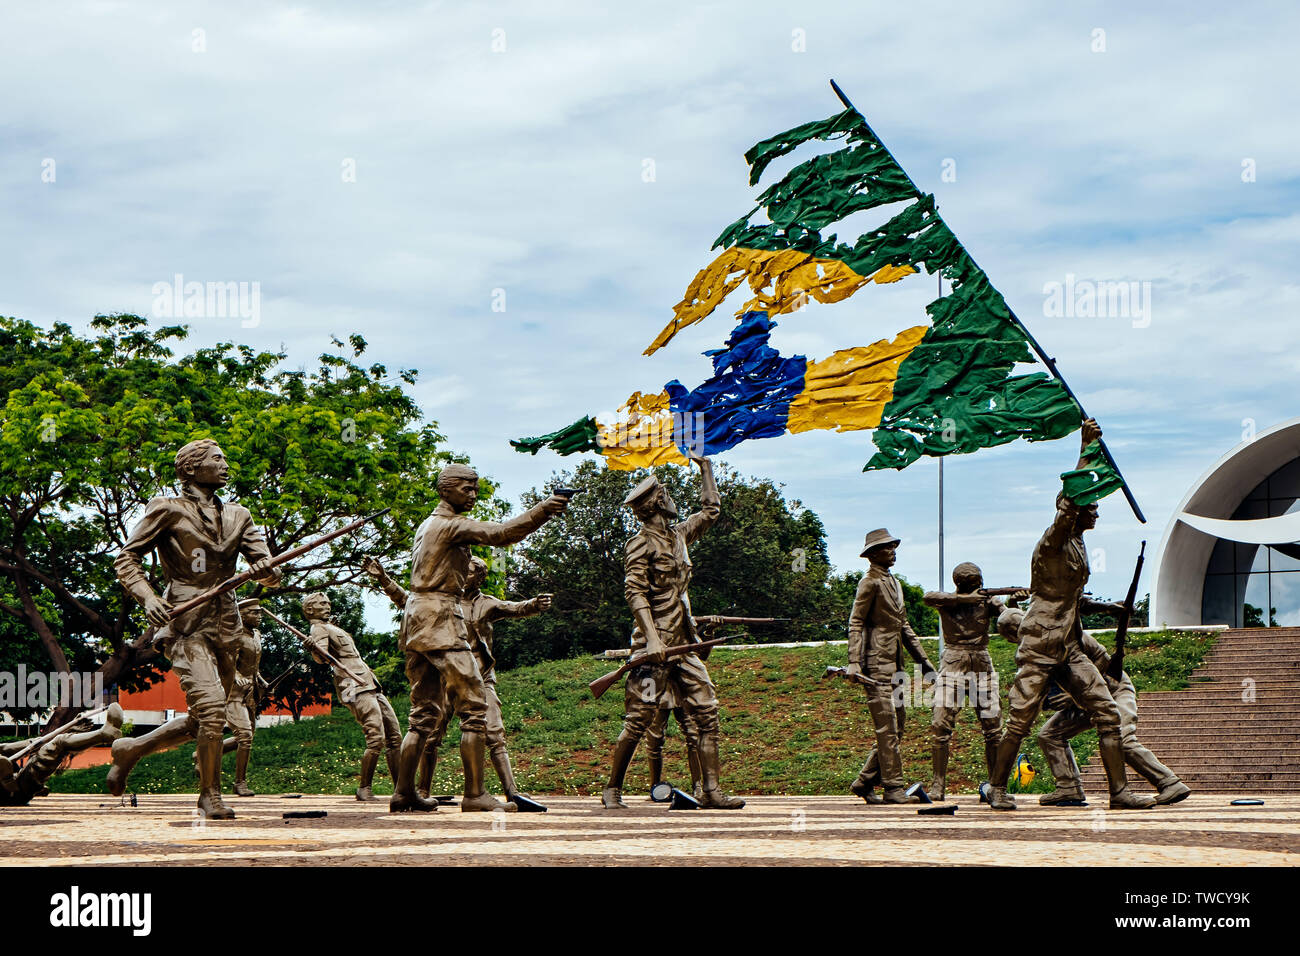 The monument of 18 do Forte and Coluna Prestes at the Sunflower Square in Palmas, State of Tocantins, Brazil Stock Photo